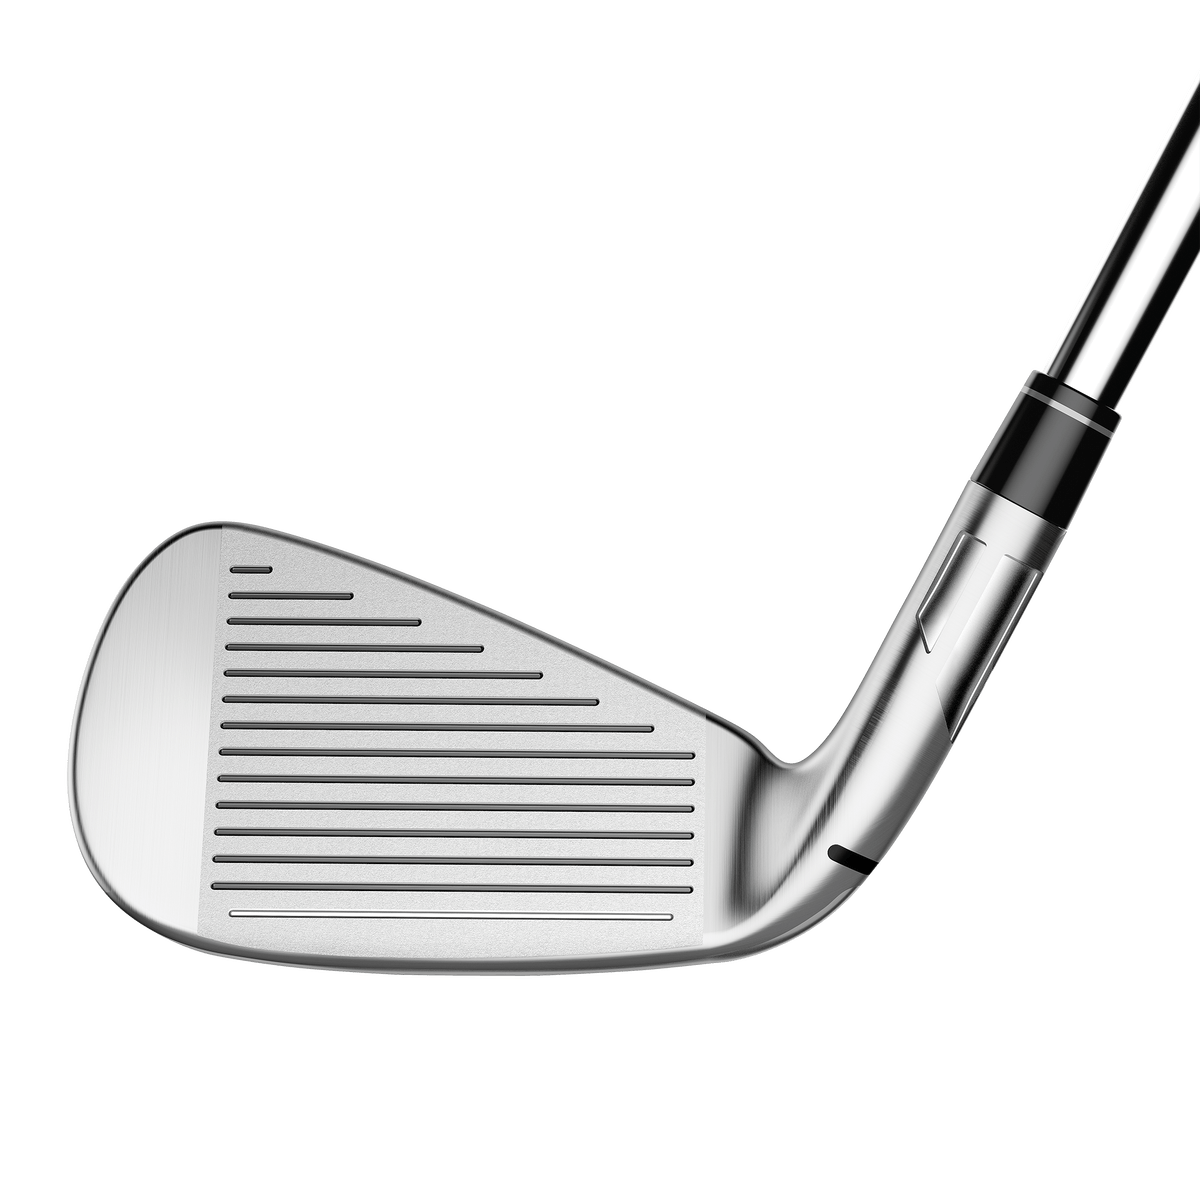 TaylorMade SIM2 Max Irons · Right handed · Steel · Stiff · 4-PW